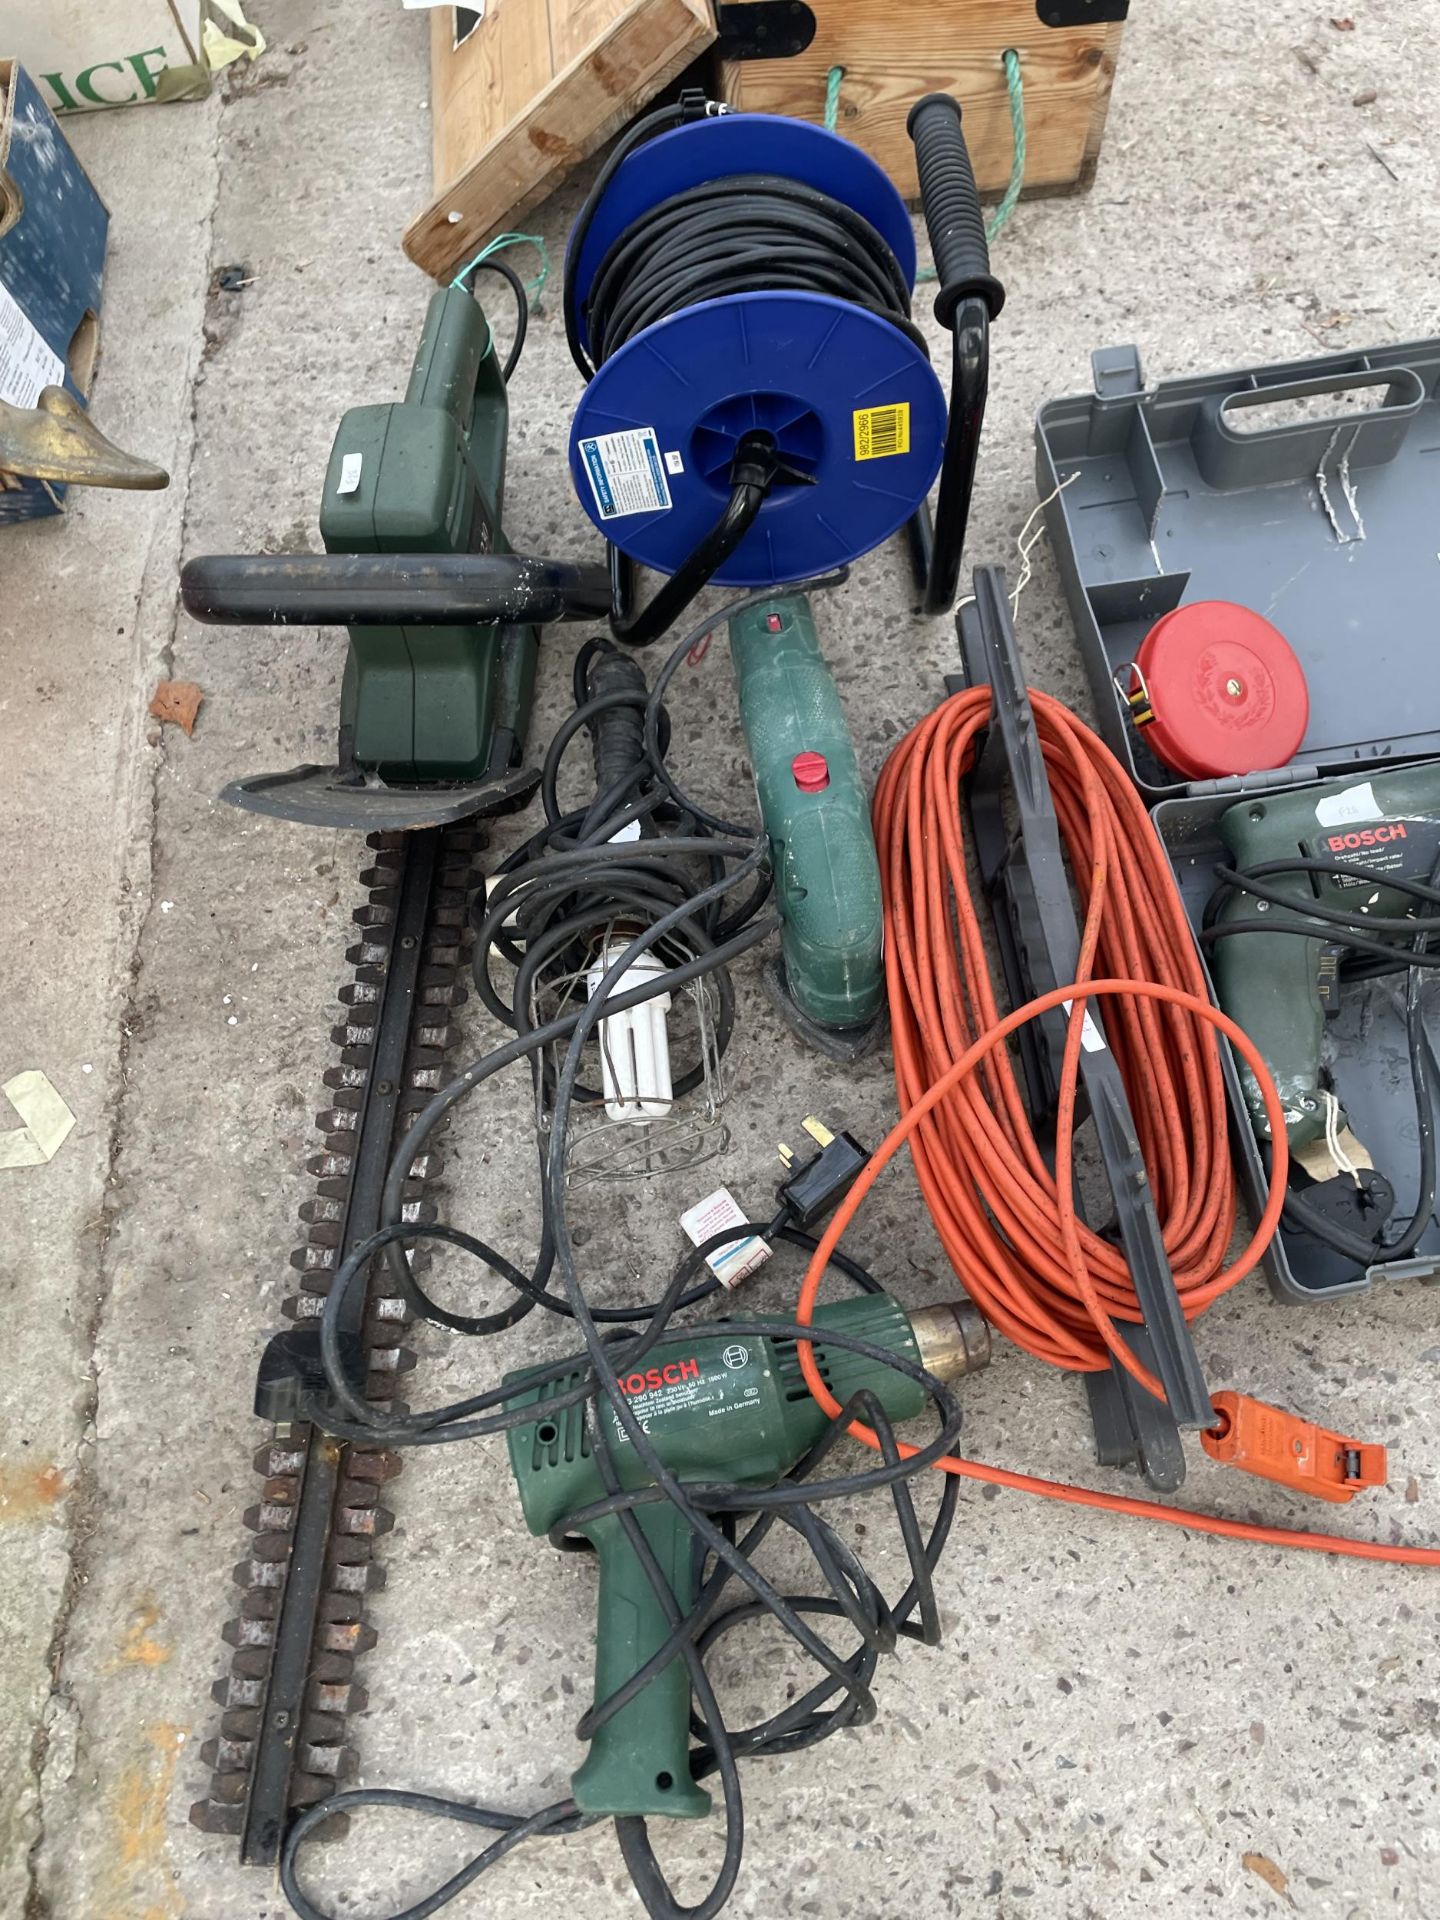 AN ASSORTMENT OF POWER TOOLS TO INCLUDE A BOSCH DRILL, ELECTRIC HEDGE TRIMMER AND PARKSIDE DETAIL - Image 2 of 3